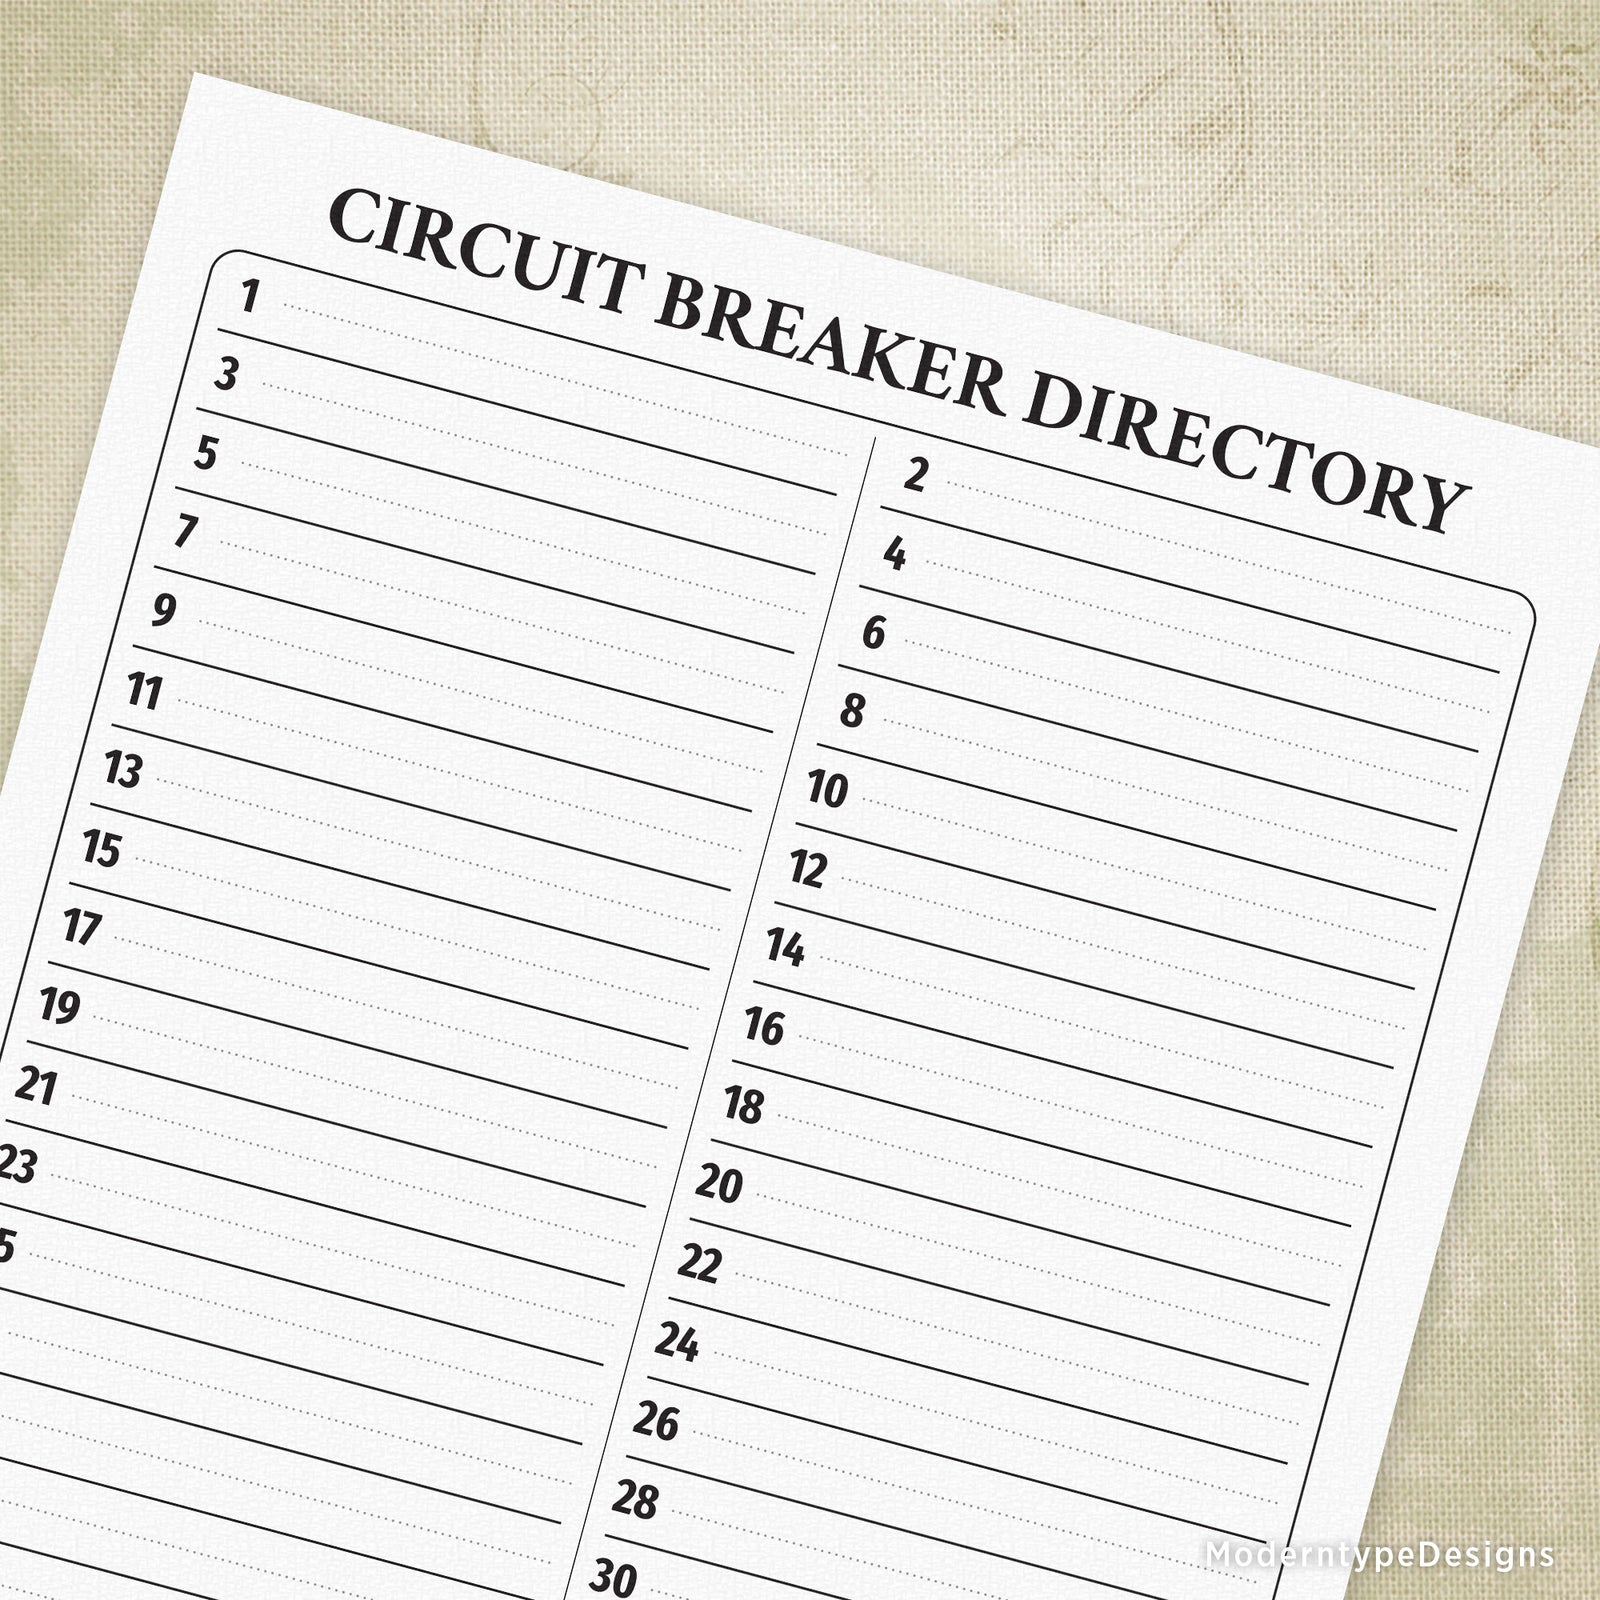 breaker-directory-printable-with-42-circuits